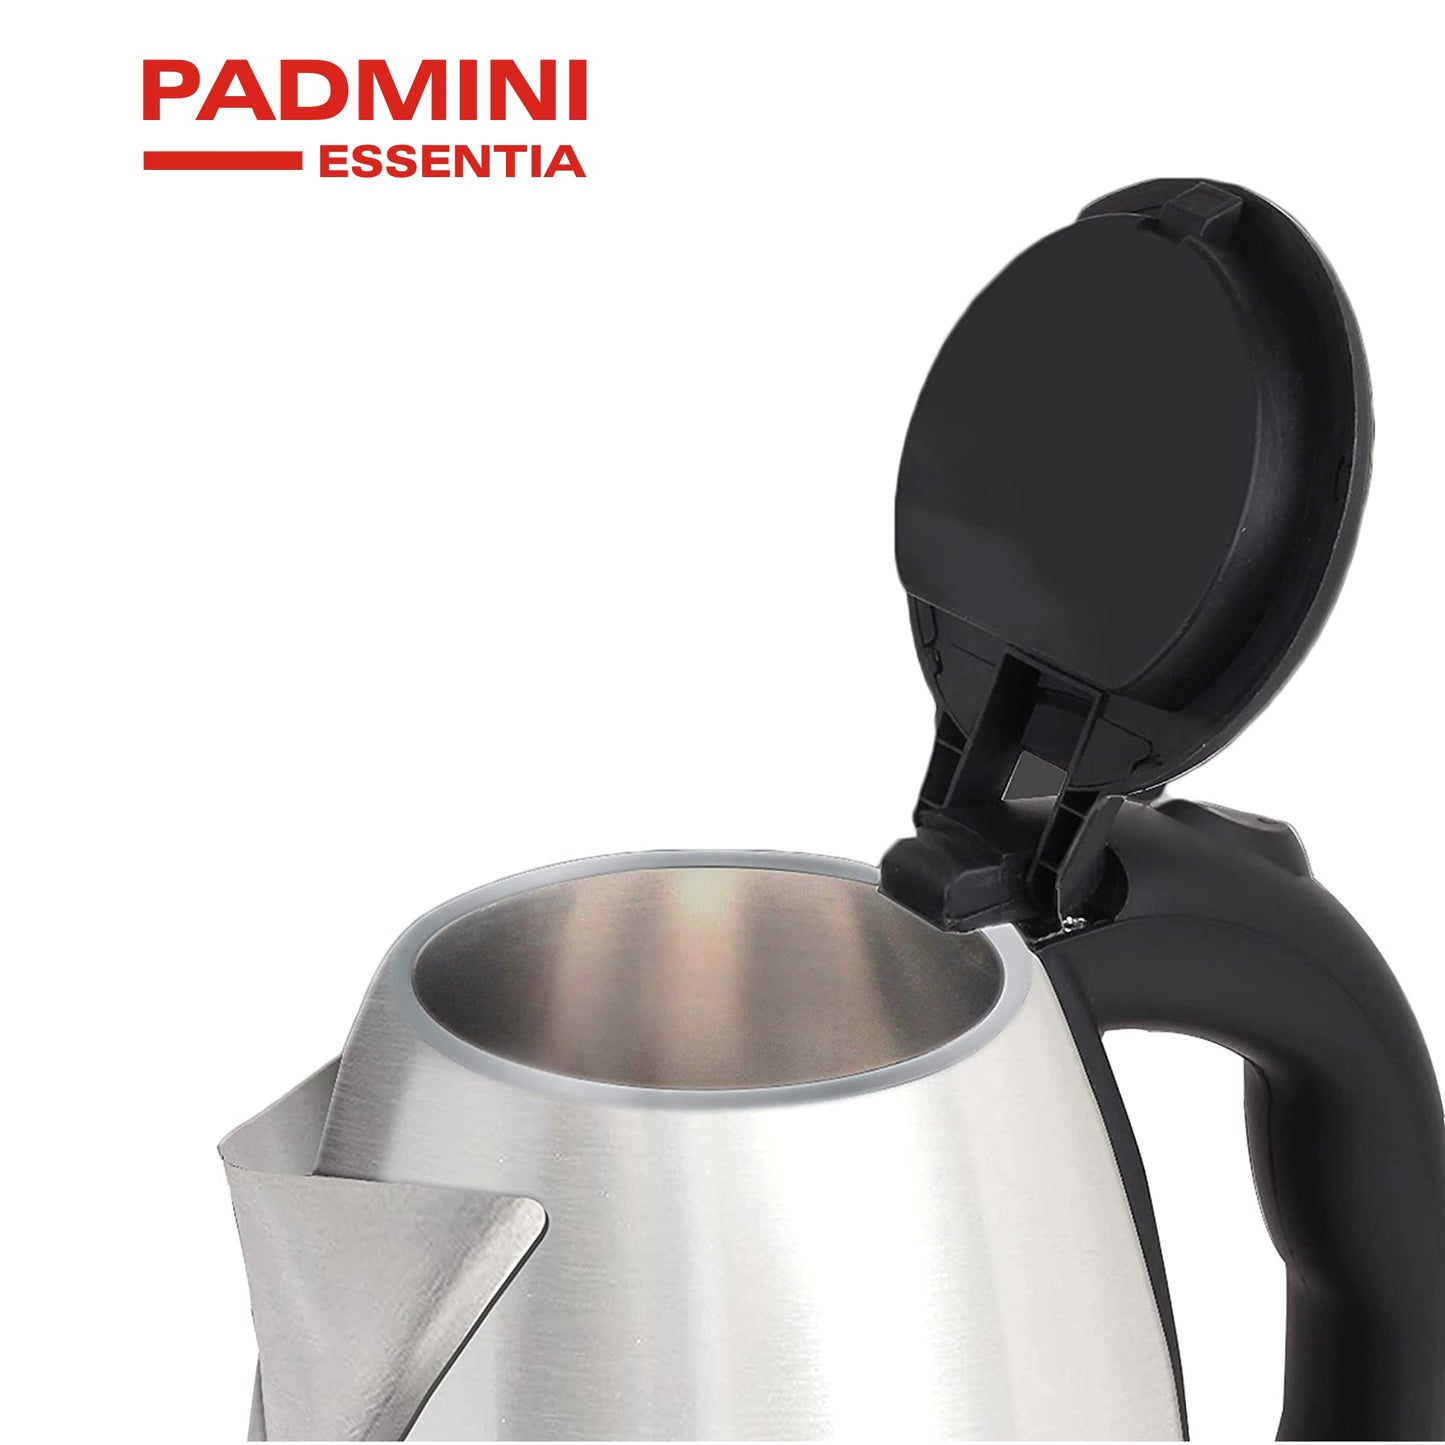 Electric kettle price online